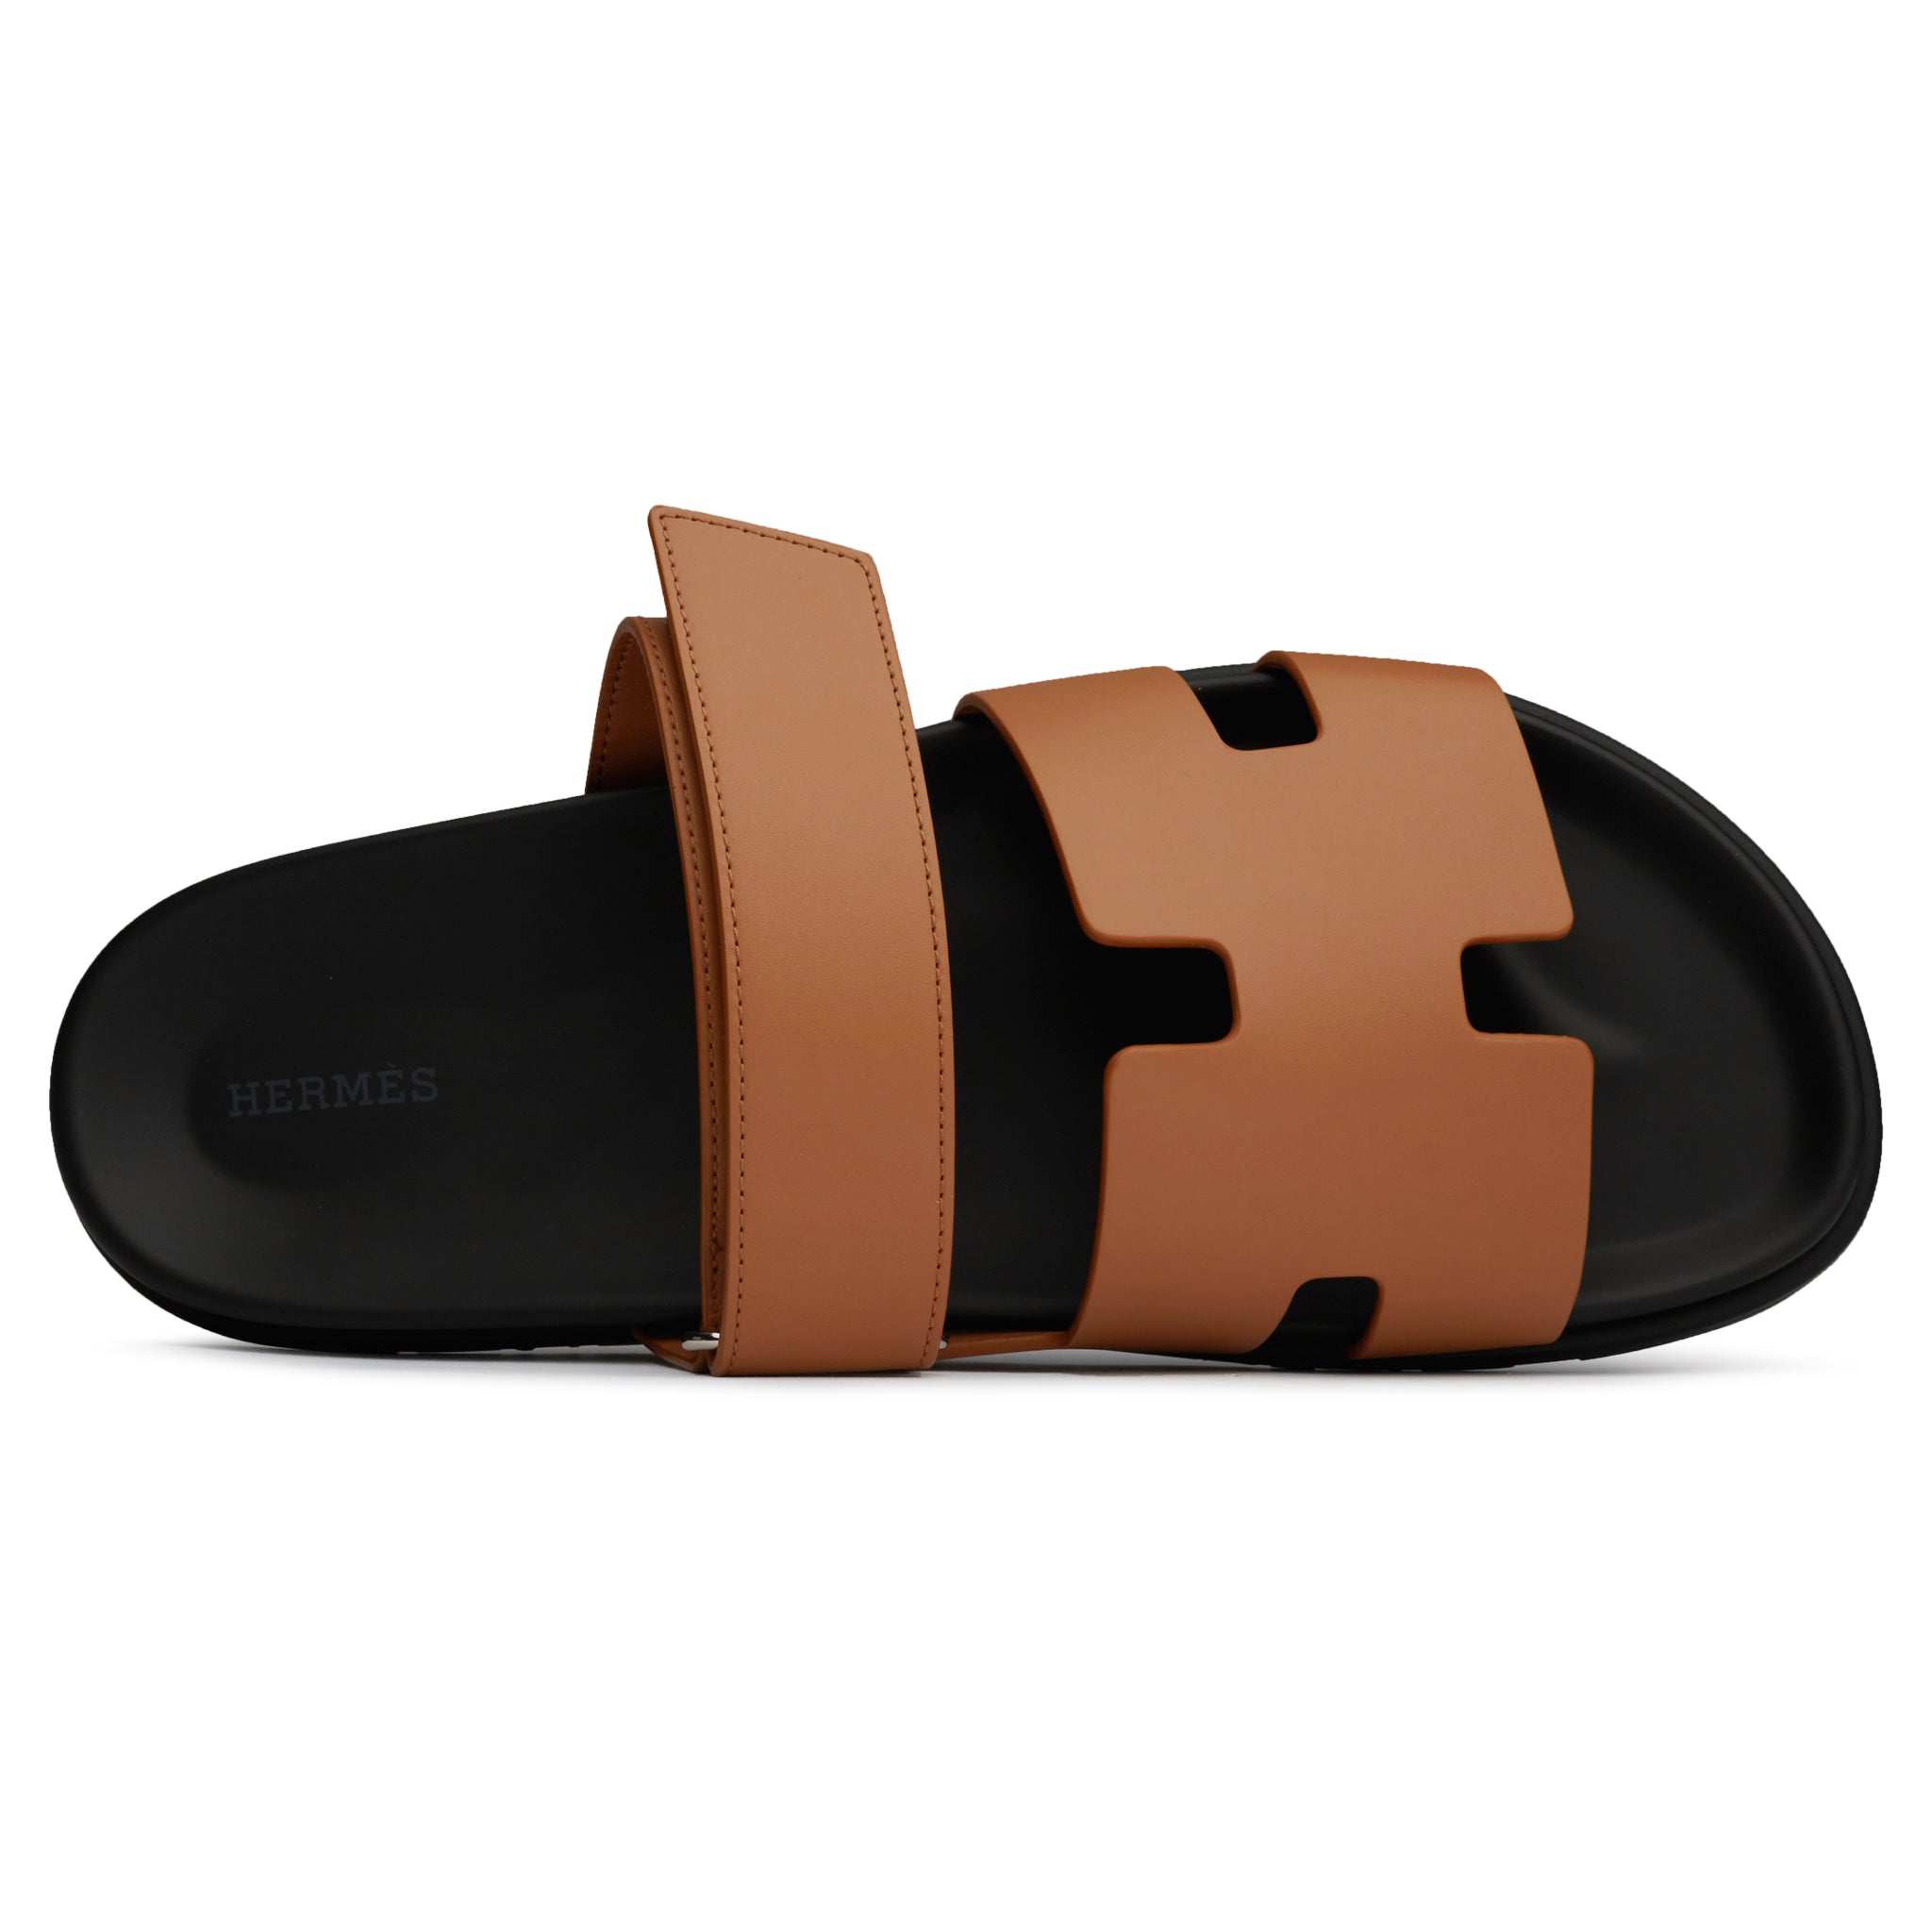 Inside view of Hermes Paris Chypre Leather Brown Sandal